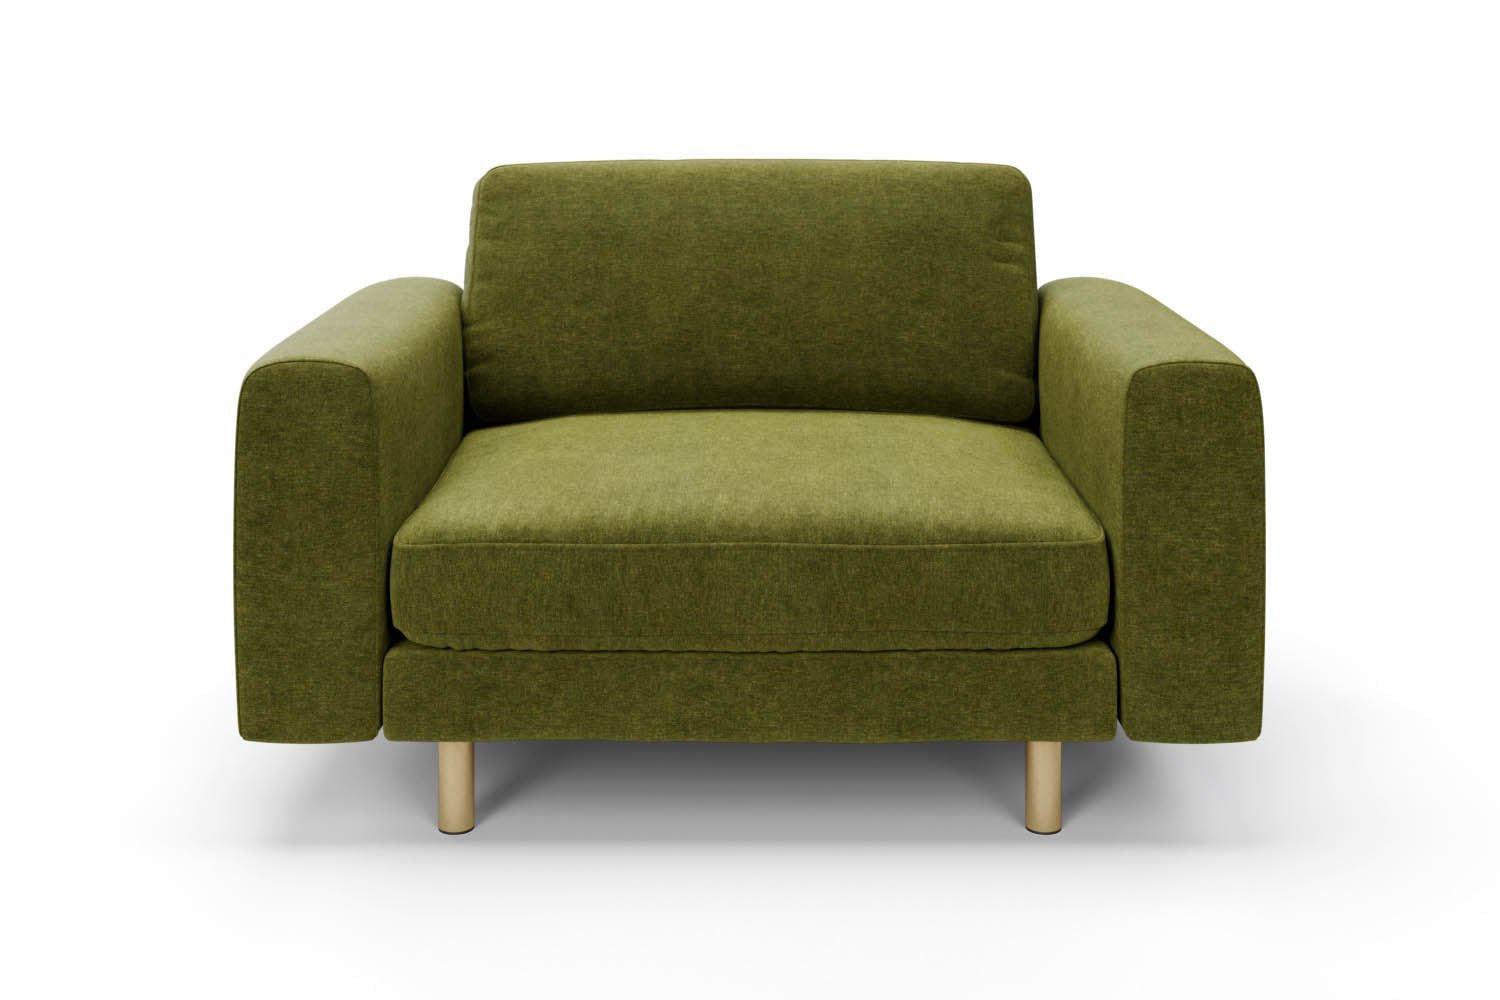 The Big Chill Snuggler in Moss Chenille with metal legs front variant_40886287007792